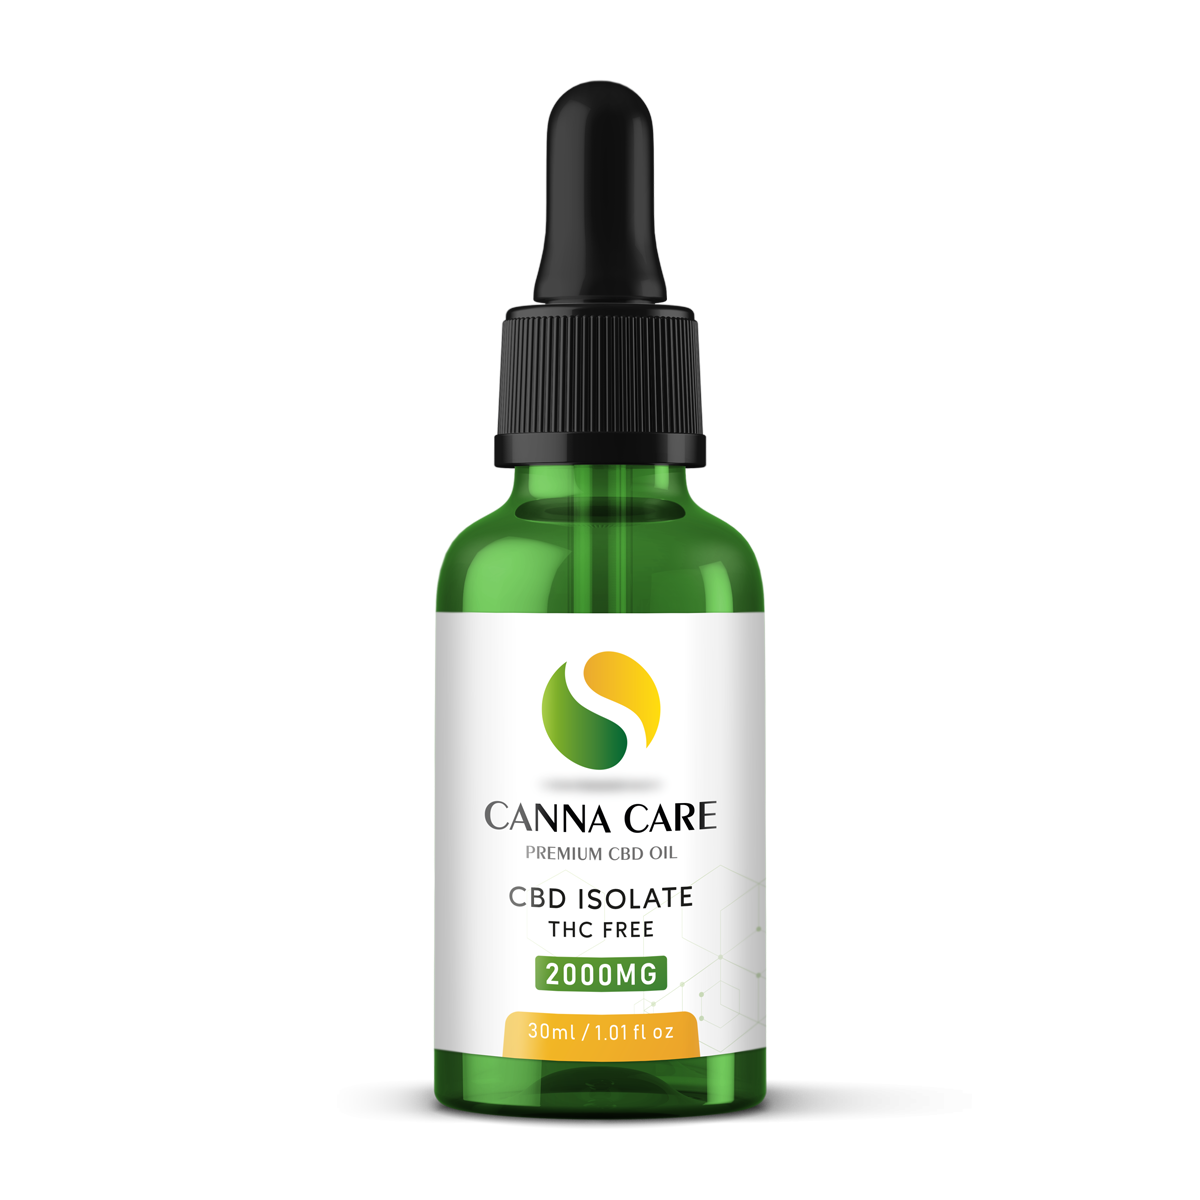 https://cannacare.gi/wp-content/uploads/2021/07/30ml-Isolate-2000mg.png